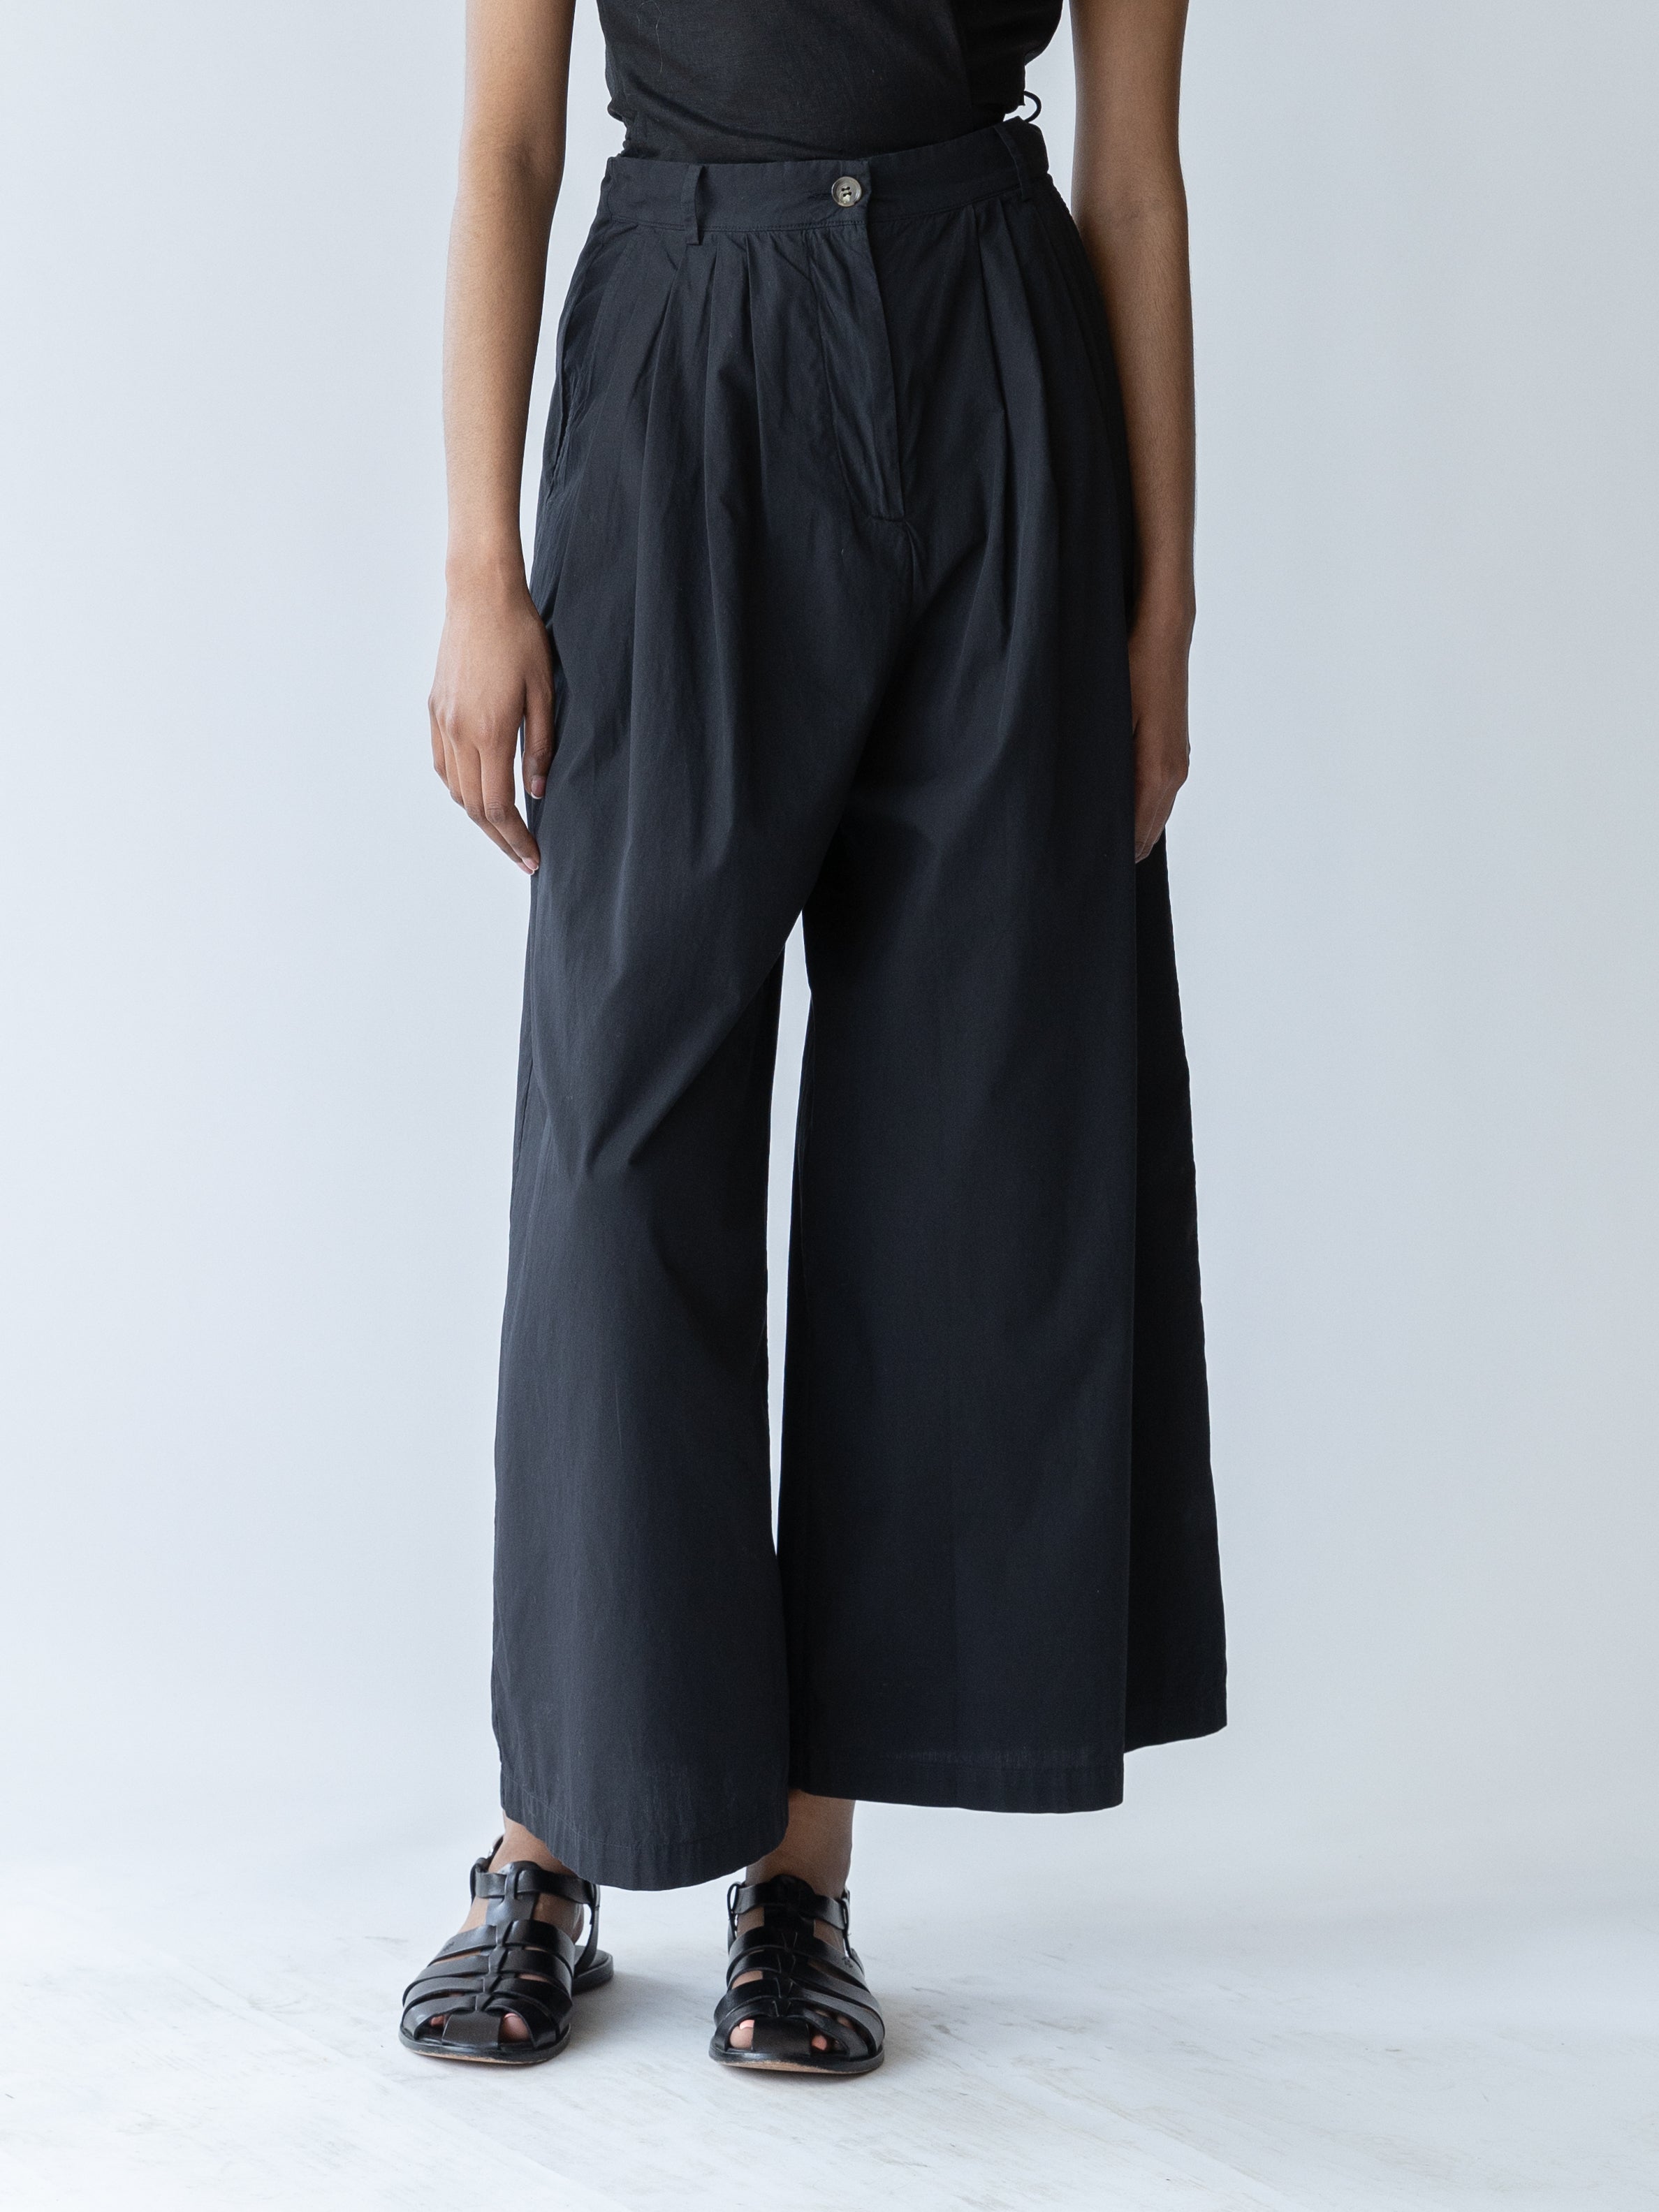 Thumbnail image of Volume Trouser in Onyx